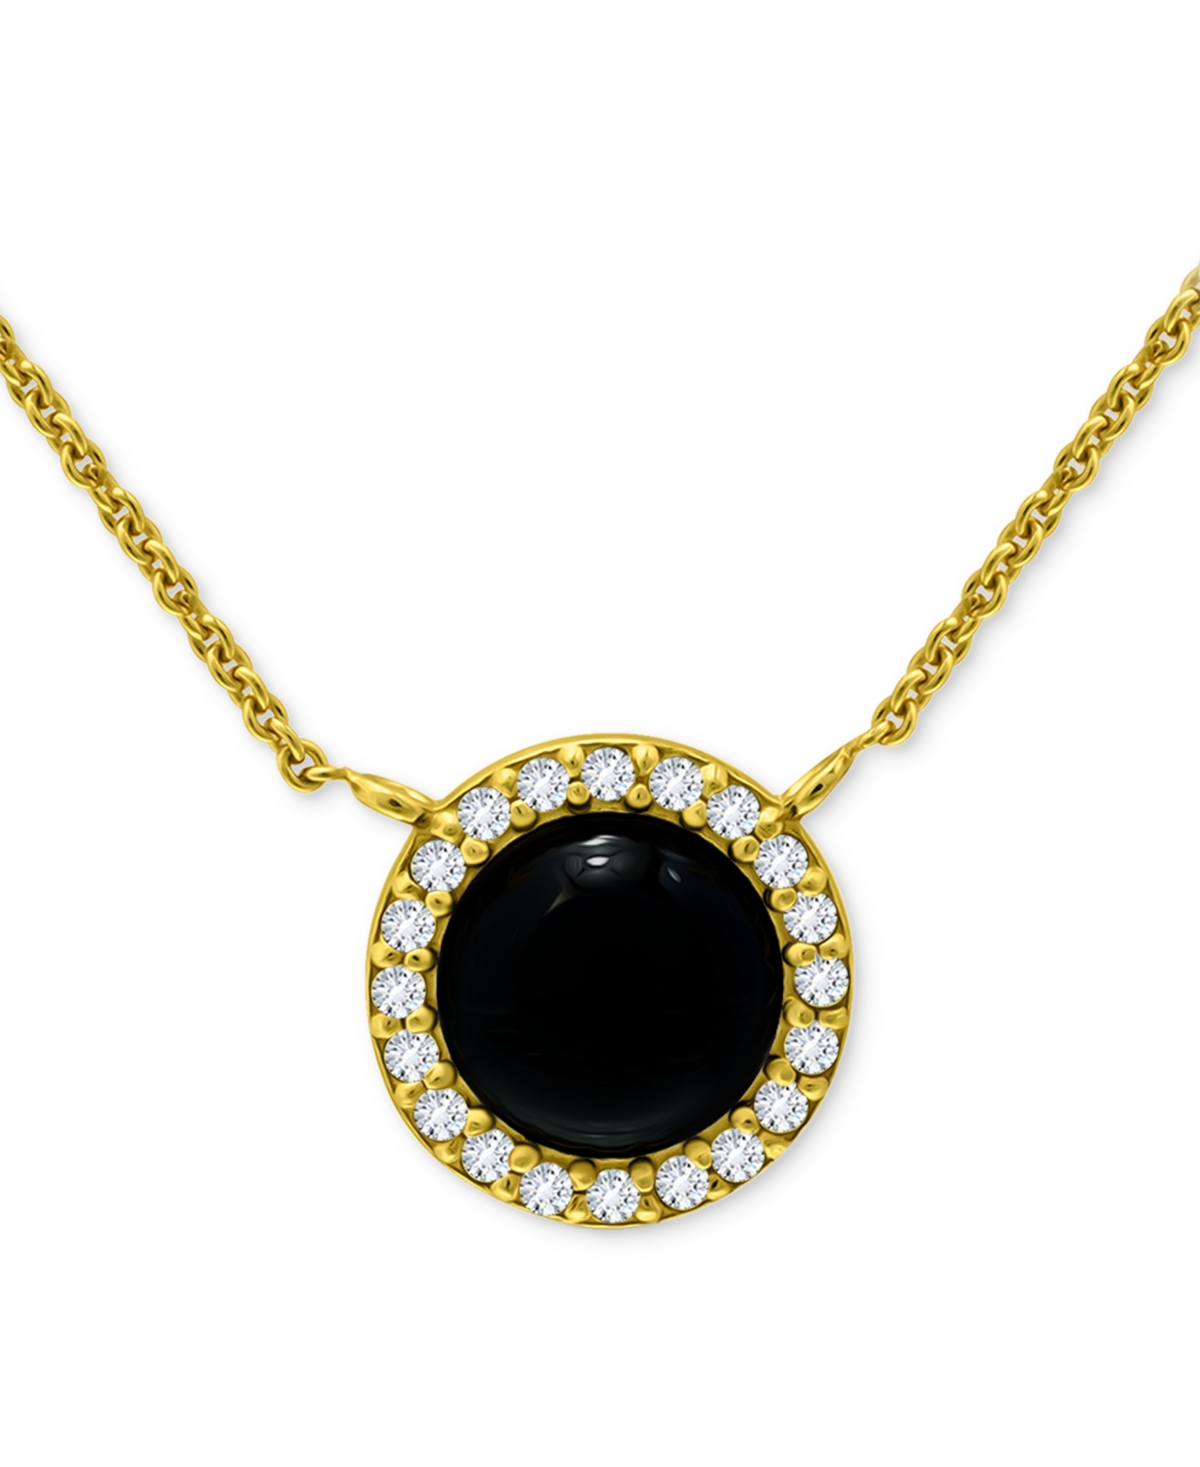 Giani Bernini Onyx & Cubic Zirconia Halo Pendant Necklace In 18k Gold-plated Sterling Silver, 16" + 2" Extender (a In Amethyst,gold